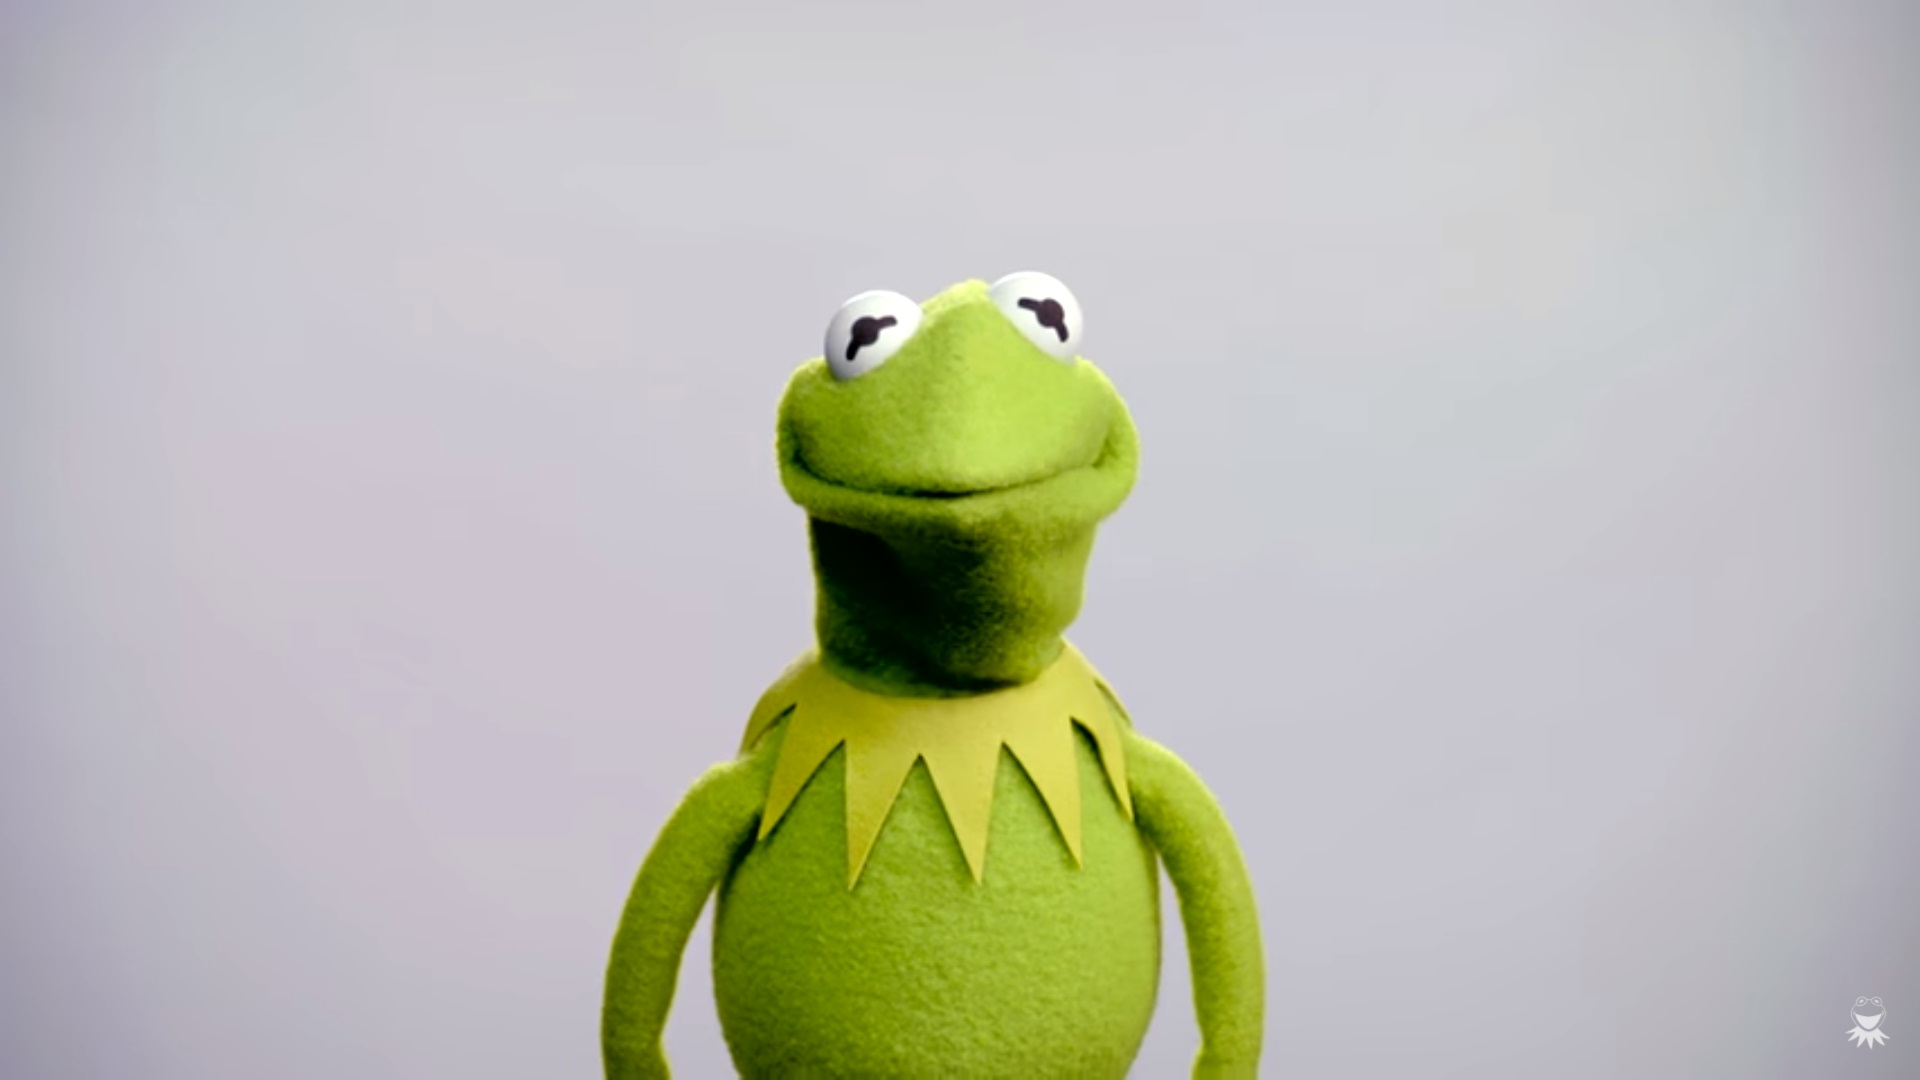 Muppet's “Thought of the Week” video unveils new voice of Kermit